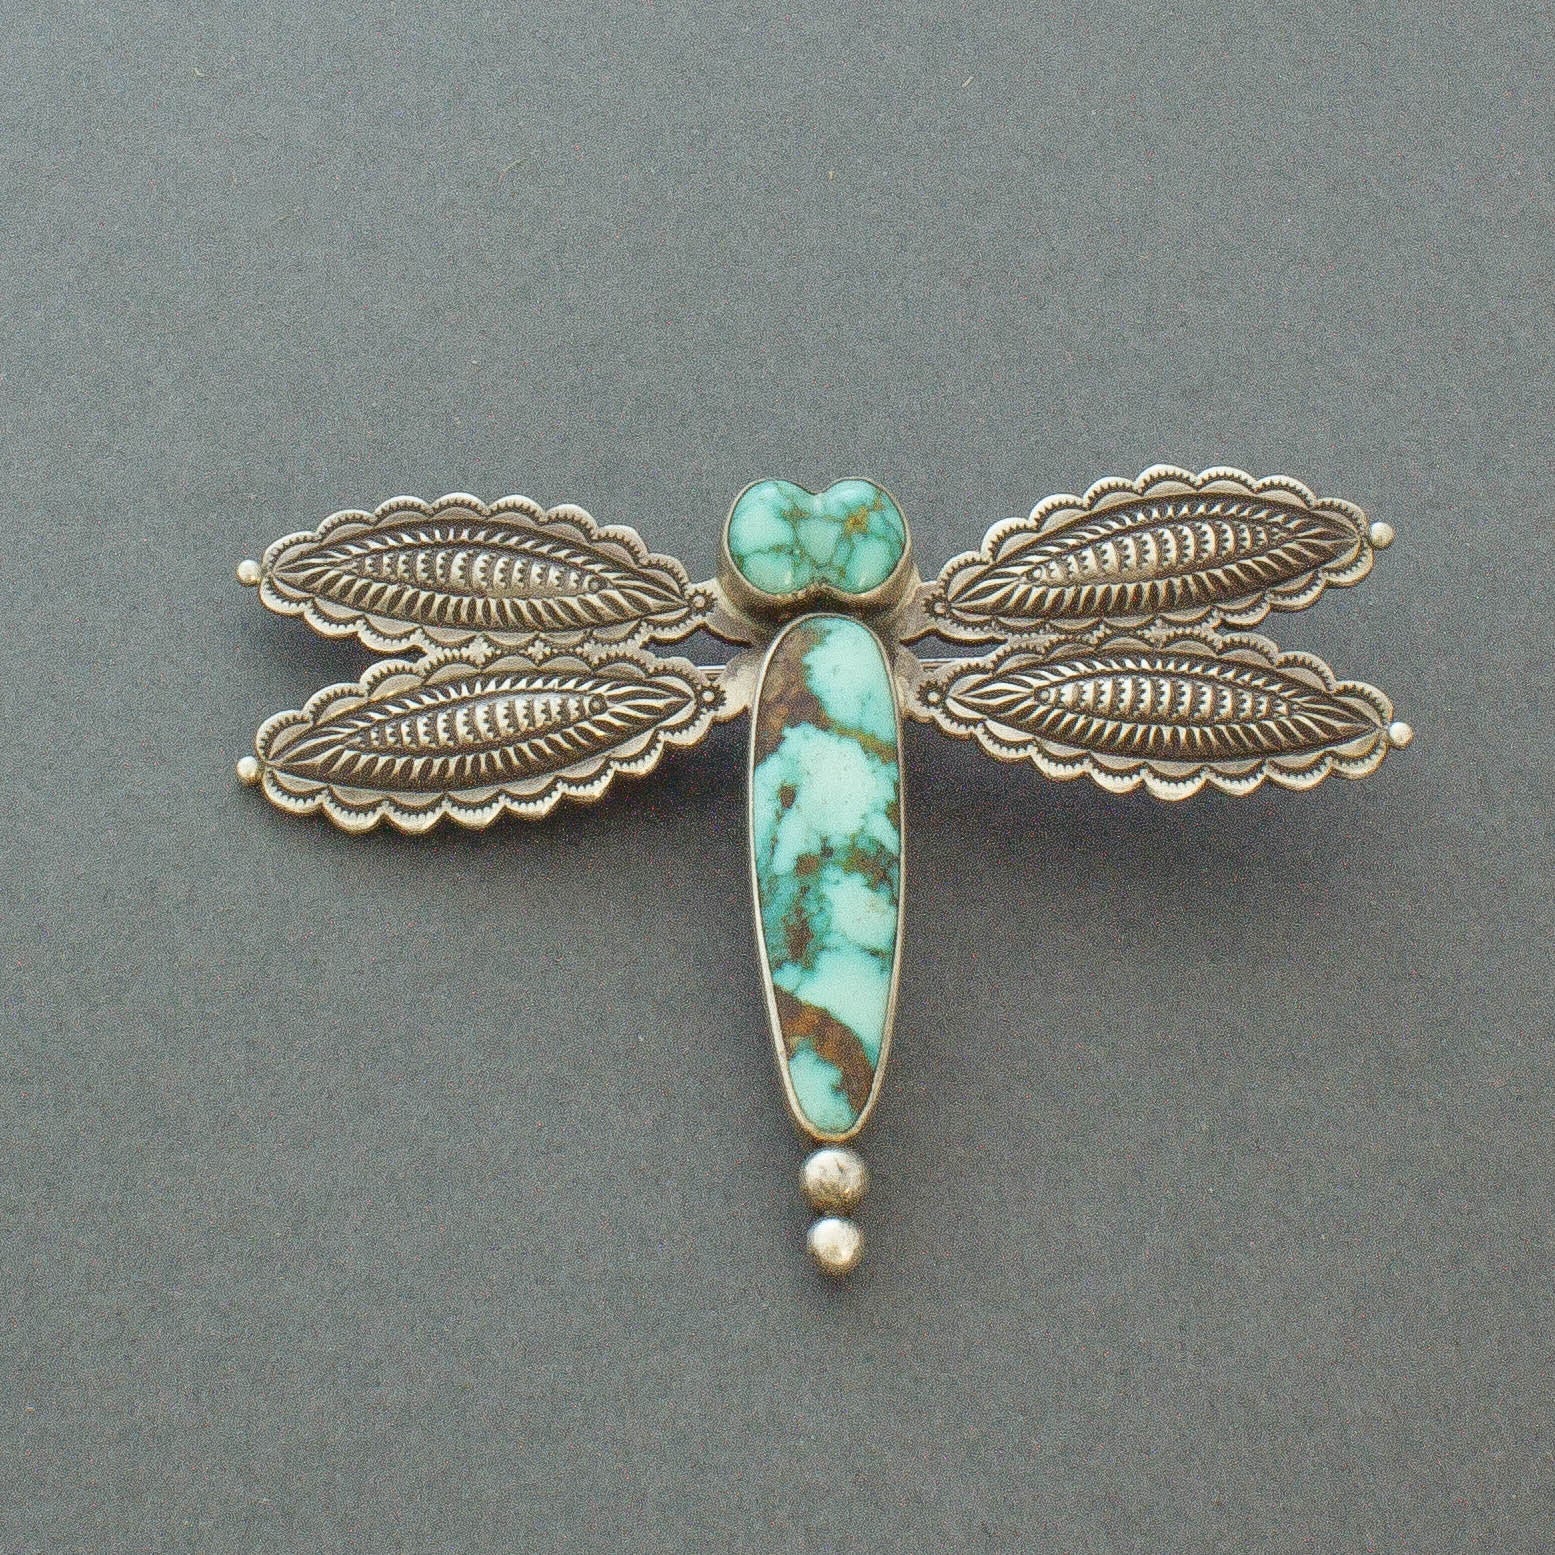 Perry Shorty Dragonfly Brooch of Silver and Turquoise - Turquoise & Tufa